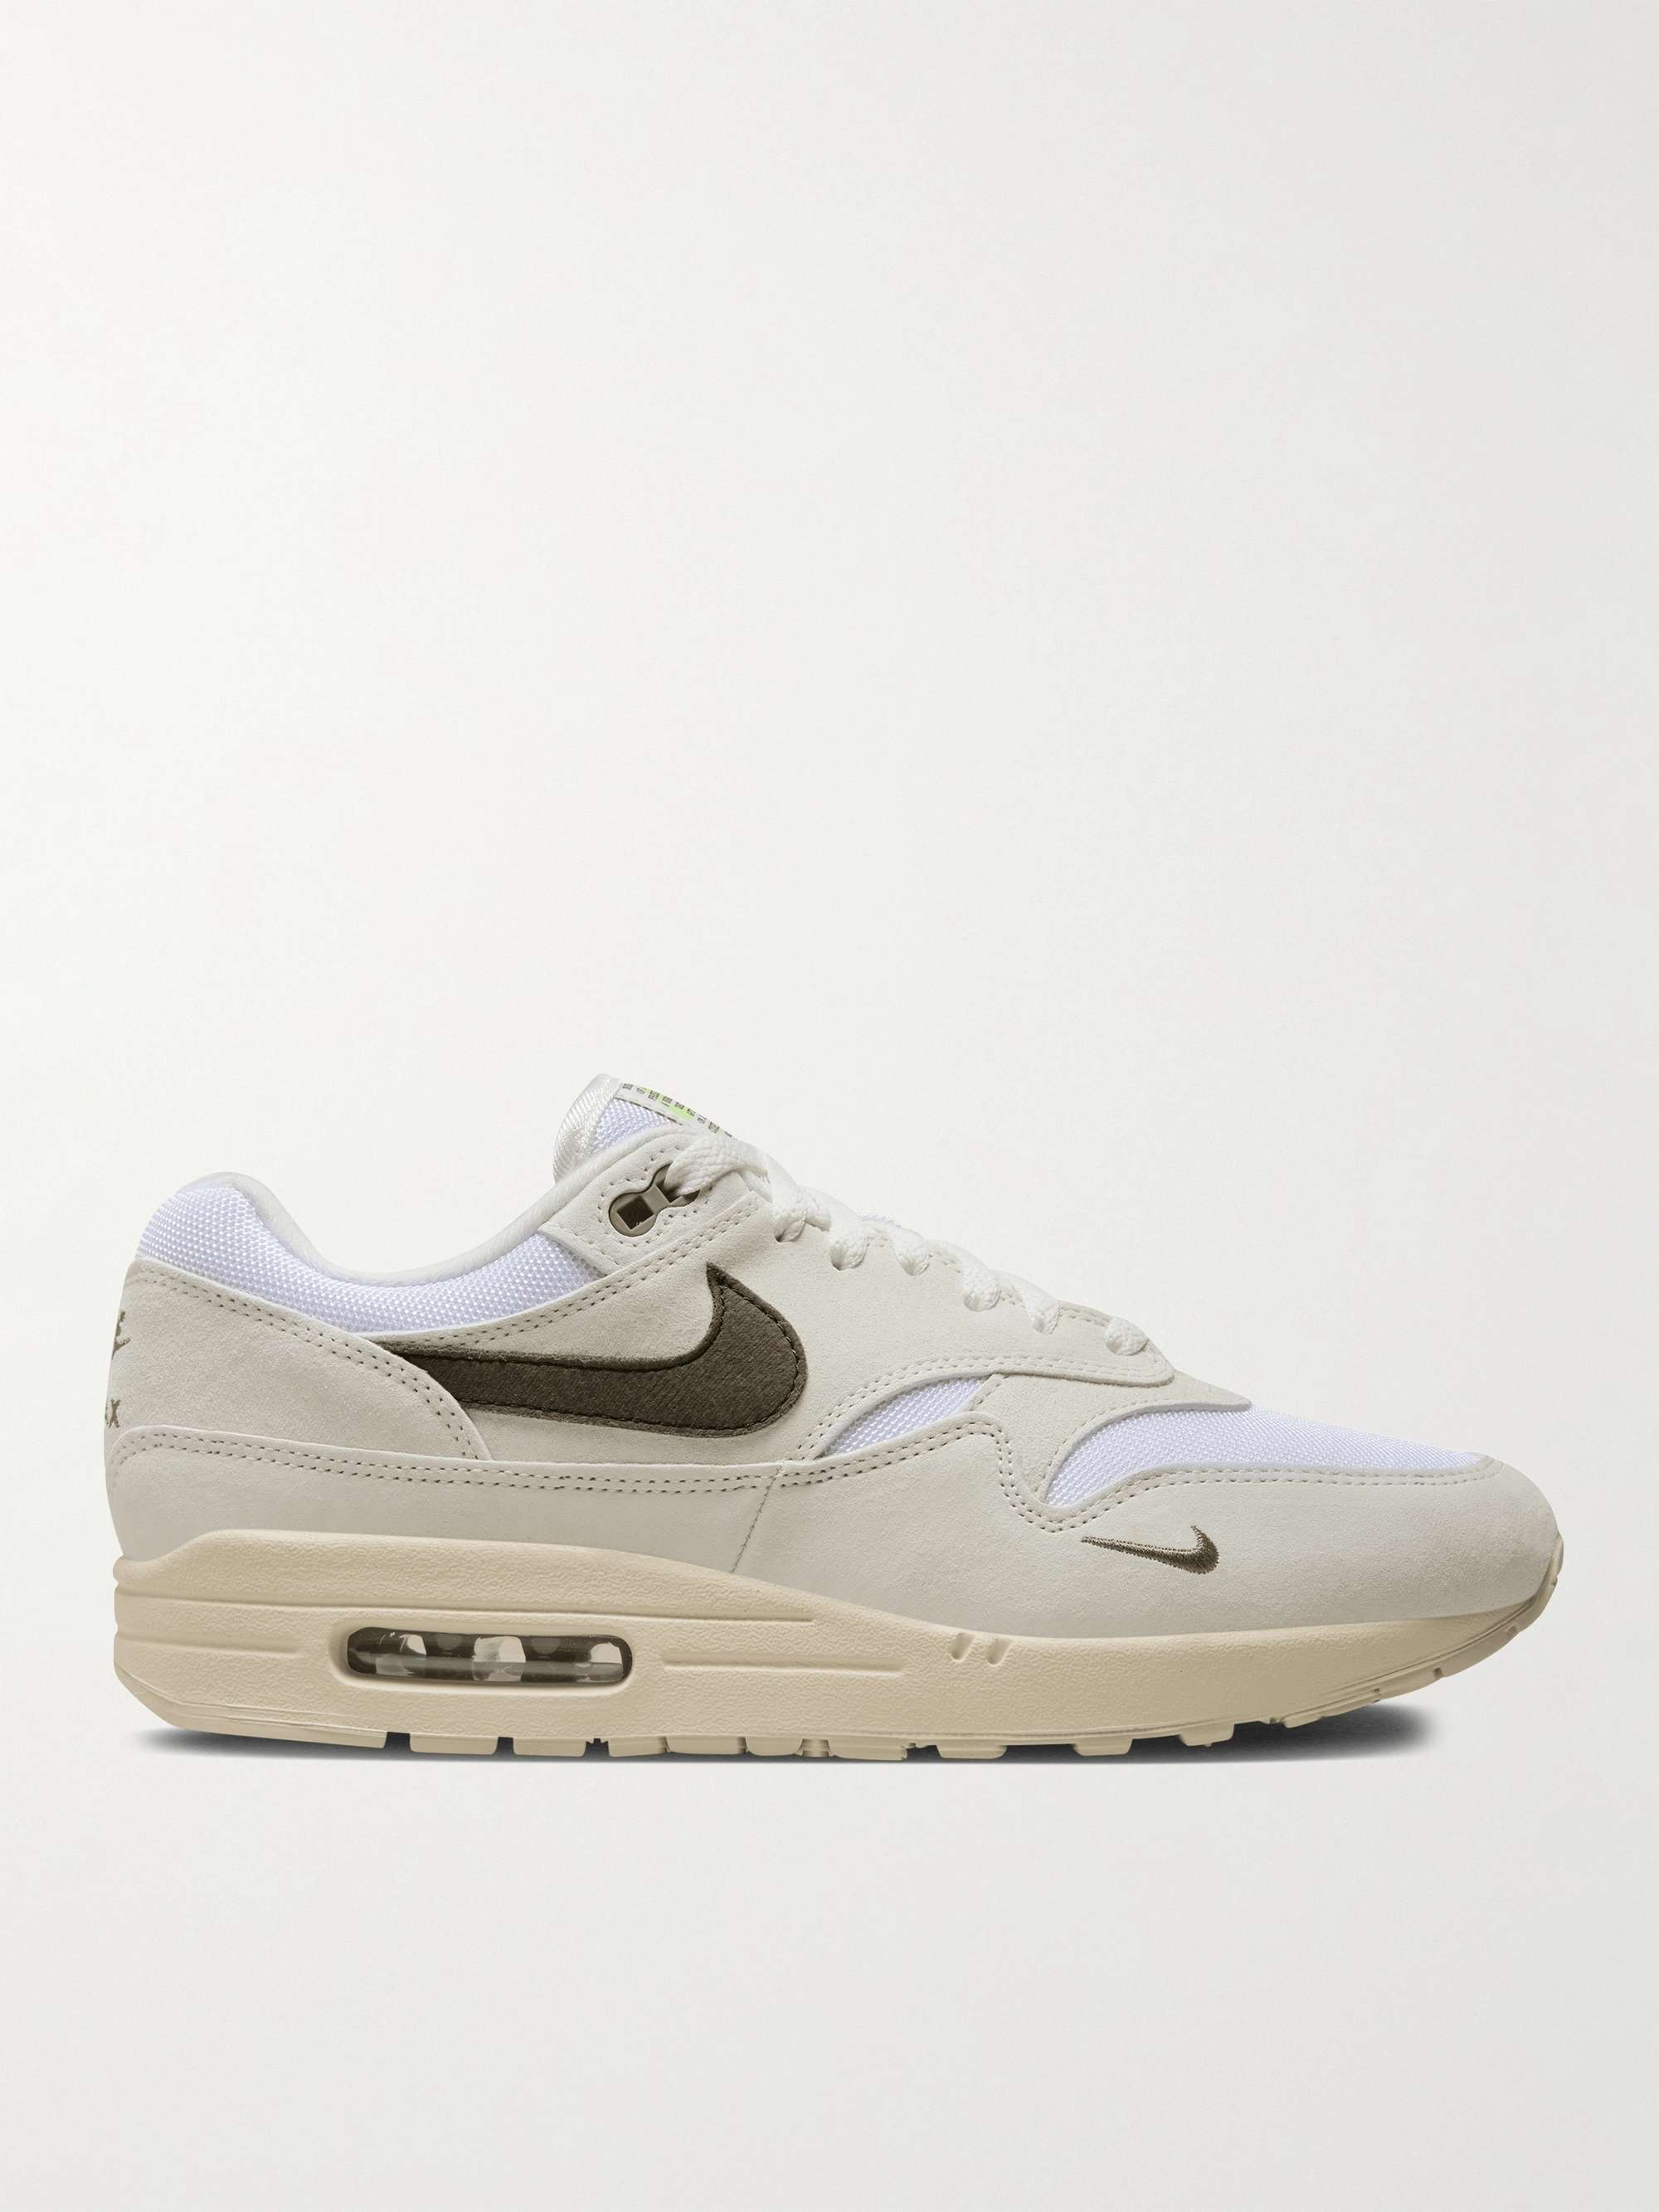 NIKE Air Max 1 Mesh, Felt and Suede Sneakers | MR PORTER